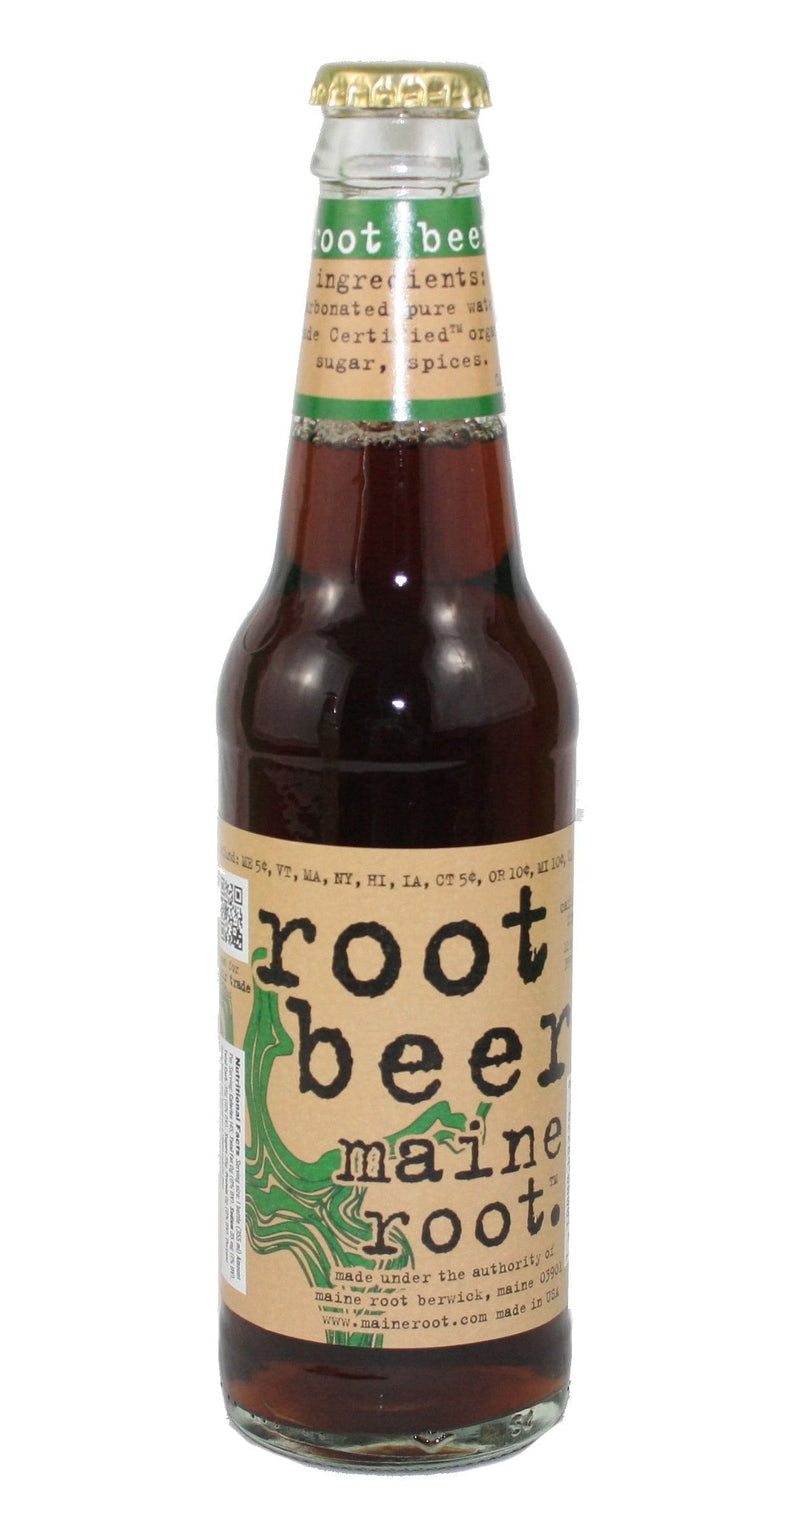 Maine Root Soda - Root Beer - Shelburne Country Store